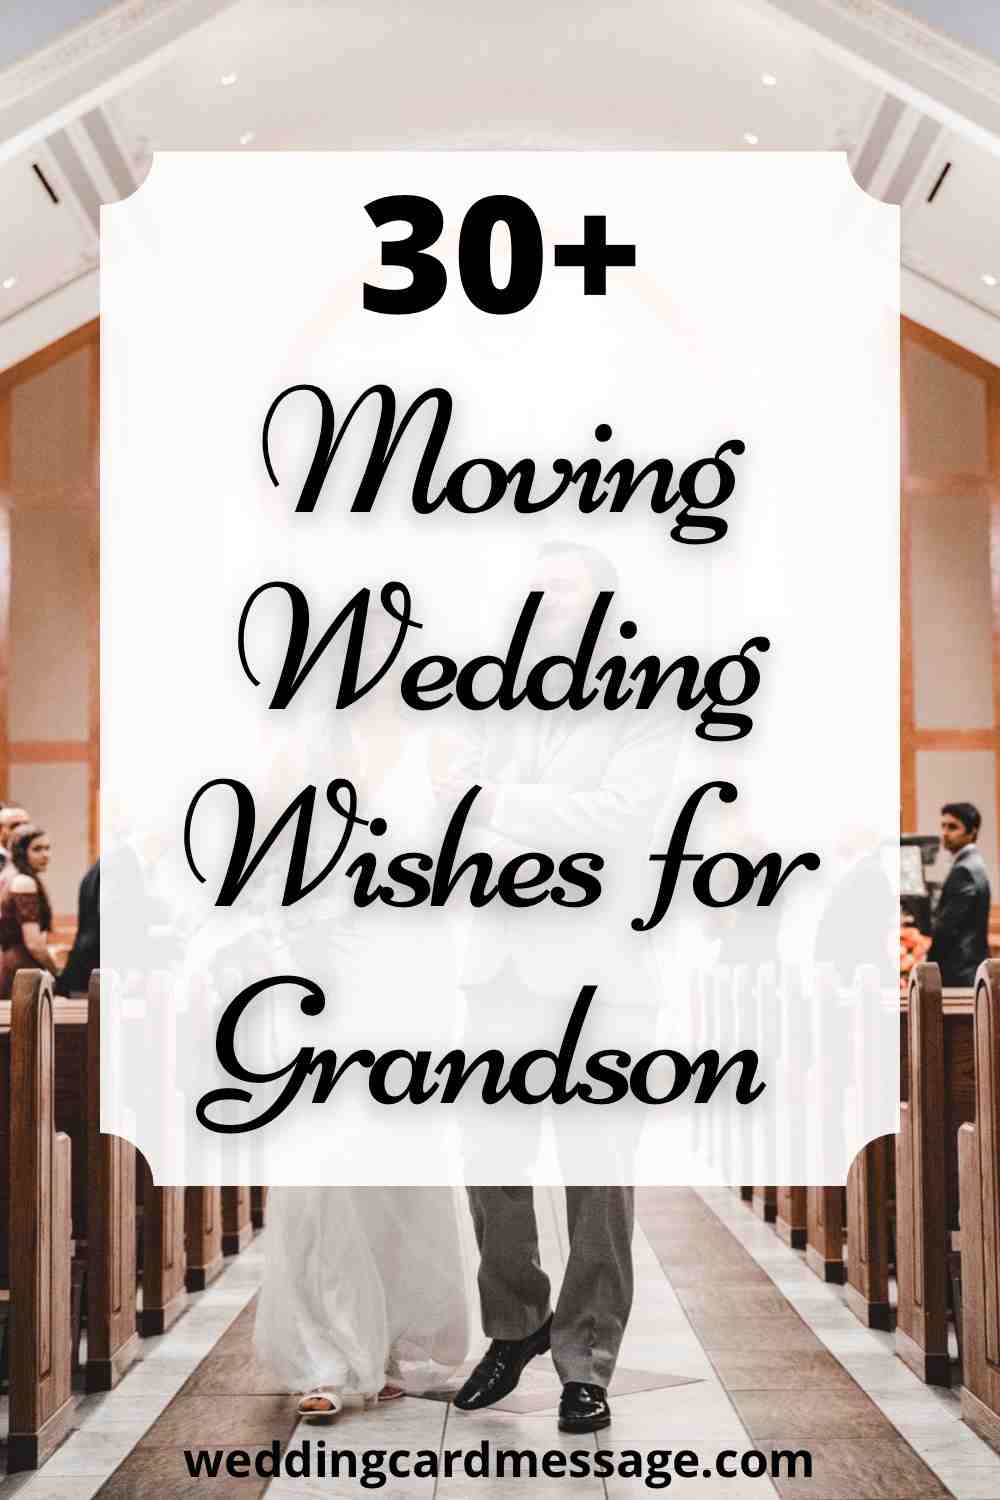 30+ Moving Wedding Wishes for a Grandson - Wedding Card Message